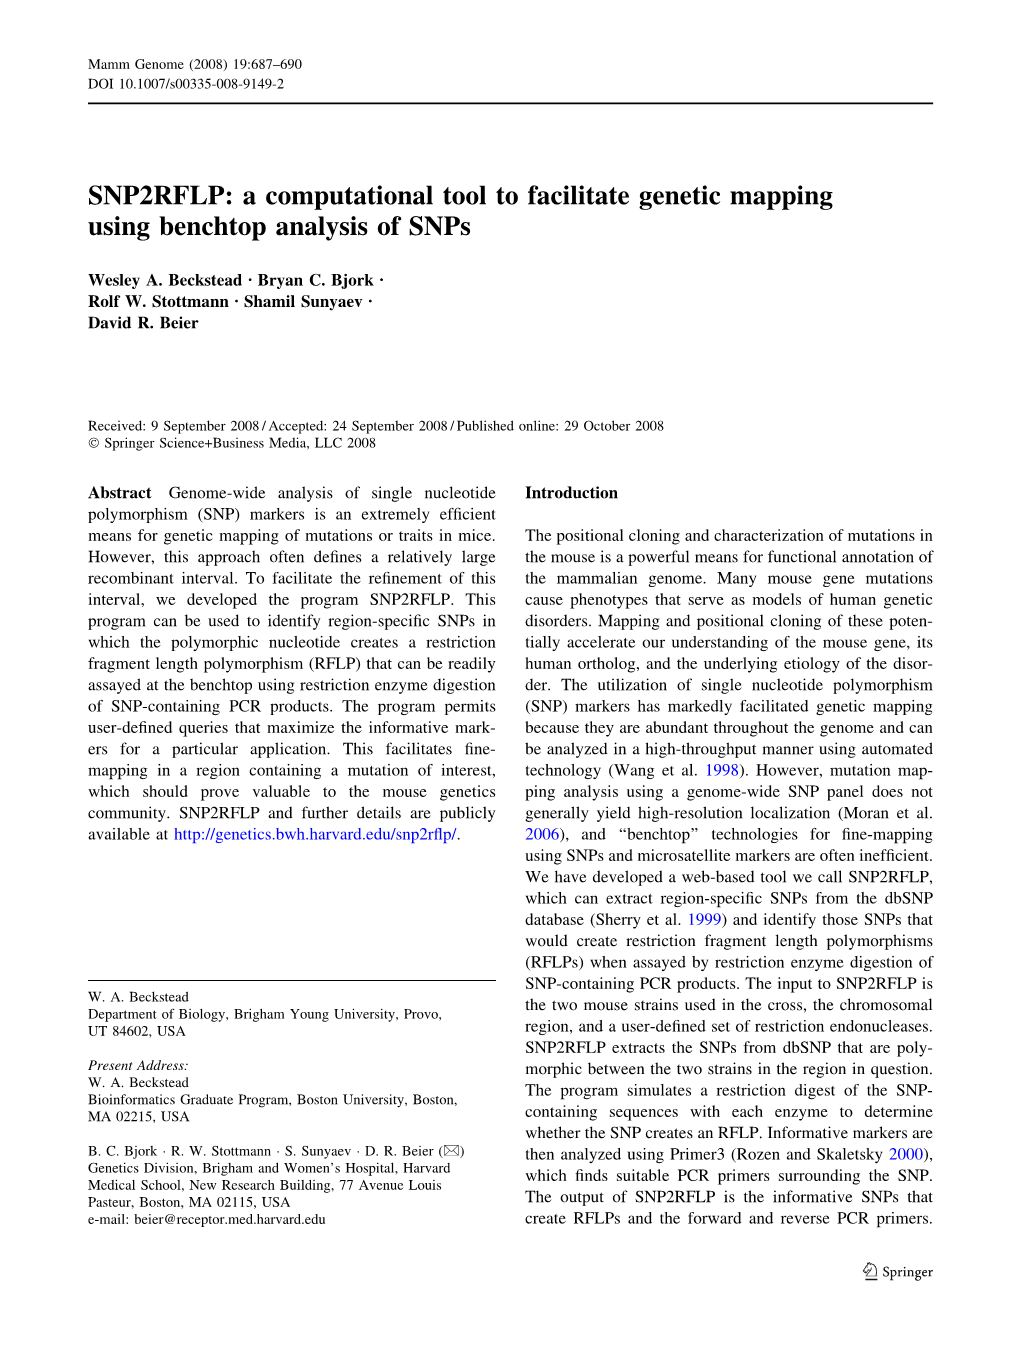 SNP2RFLP: a Computational Tool to Facilitate Genetic Mapping Using Benchtop Analysis of Snps